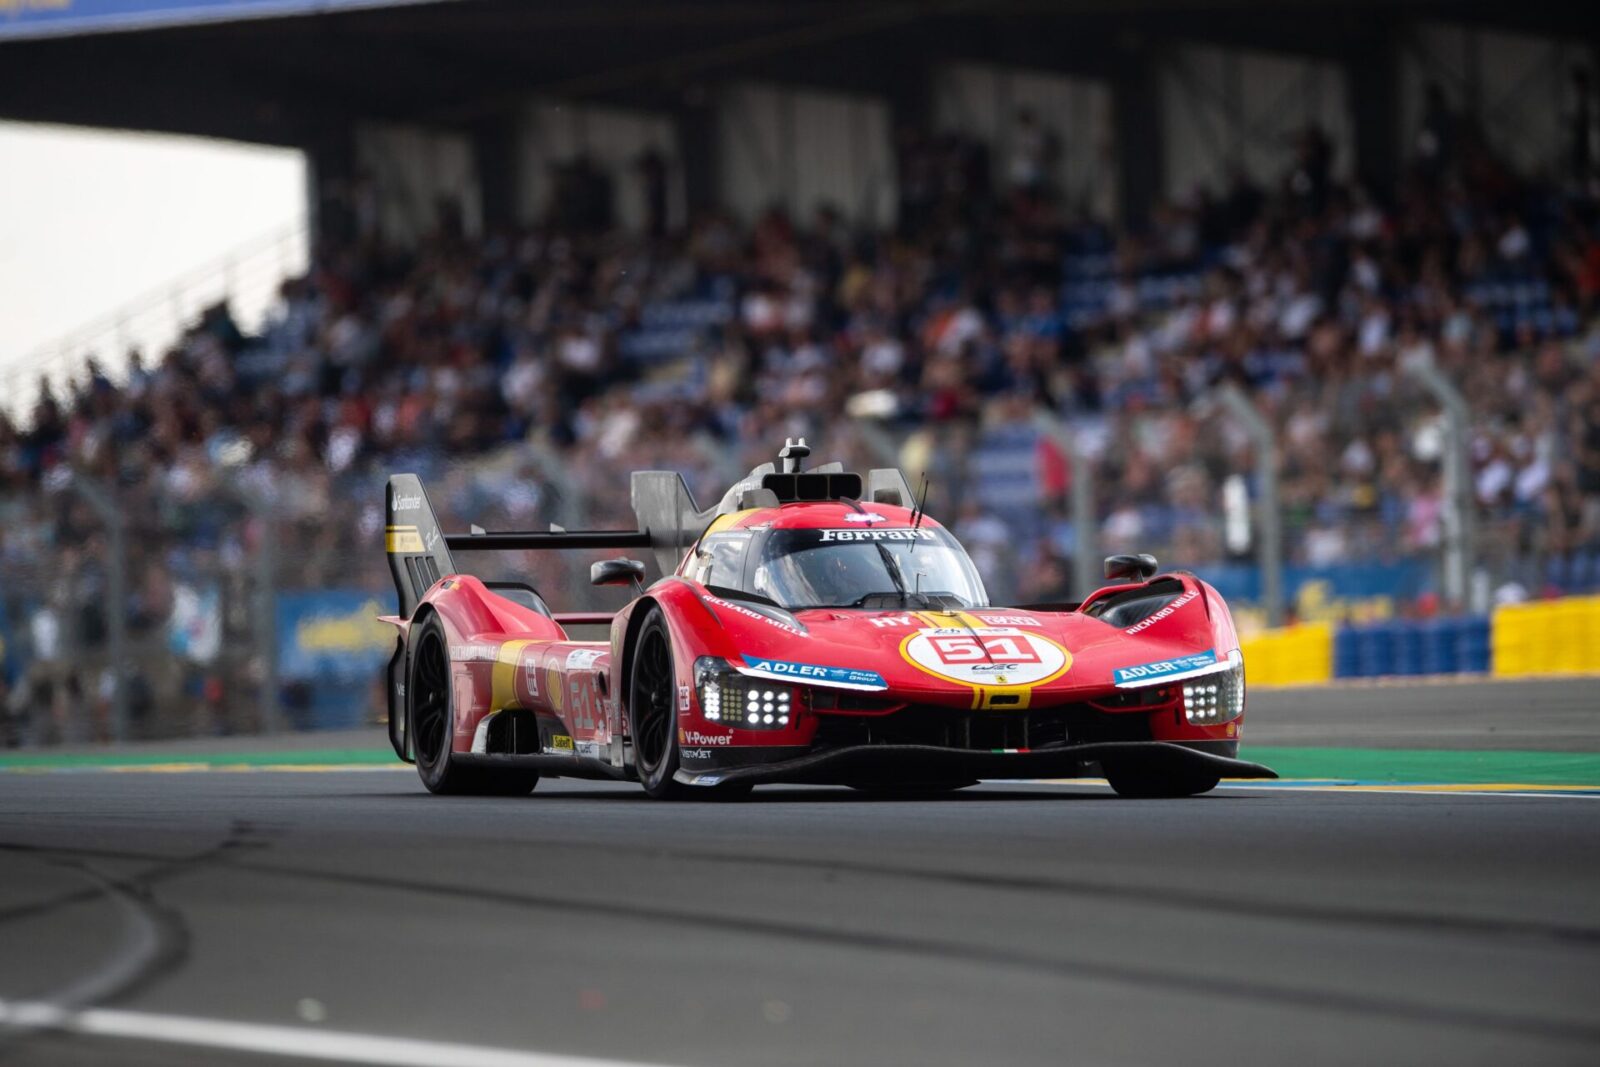 Ferrari 499P made its debut in the 24 Hours of Le Mans and won the